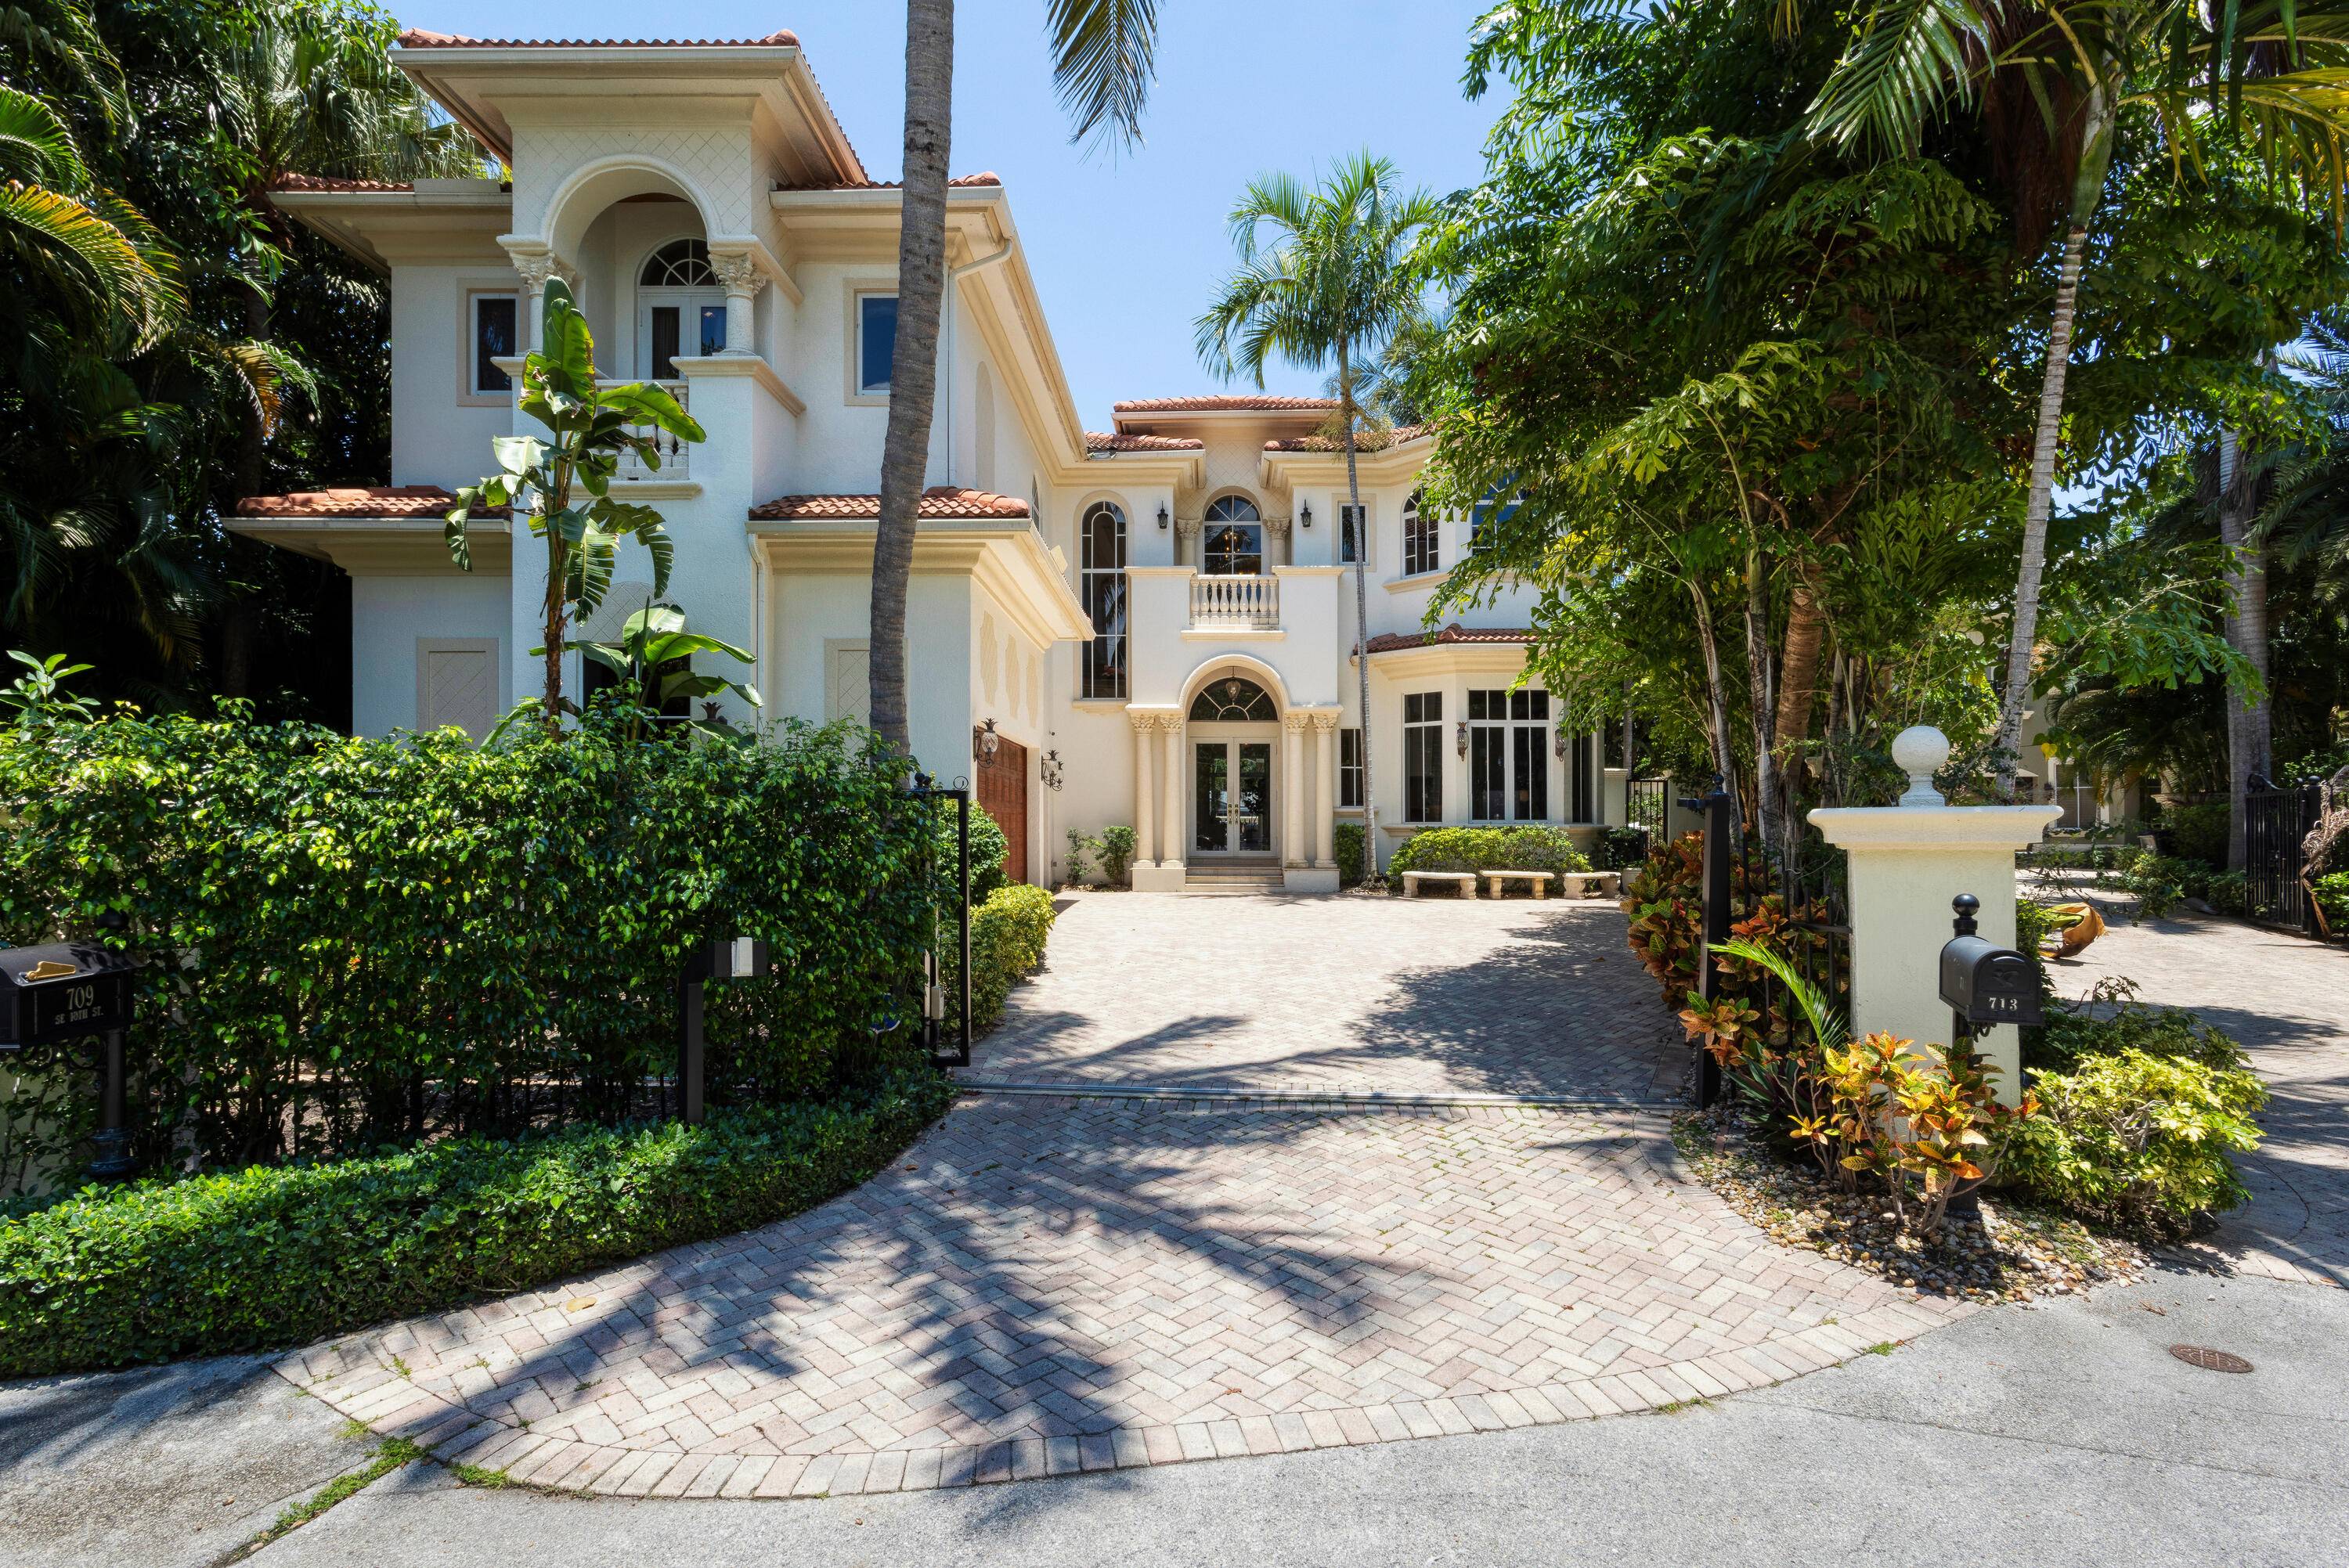 Imbued with elan, this six bedroom European inspired custom estate offers great Intracoastal views, an elevator, and two fireplaces, with one in the primary bathroom.